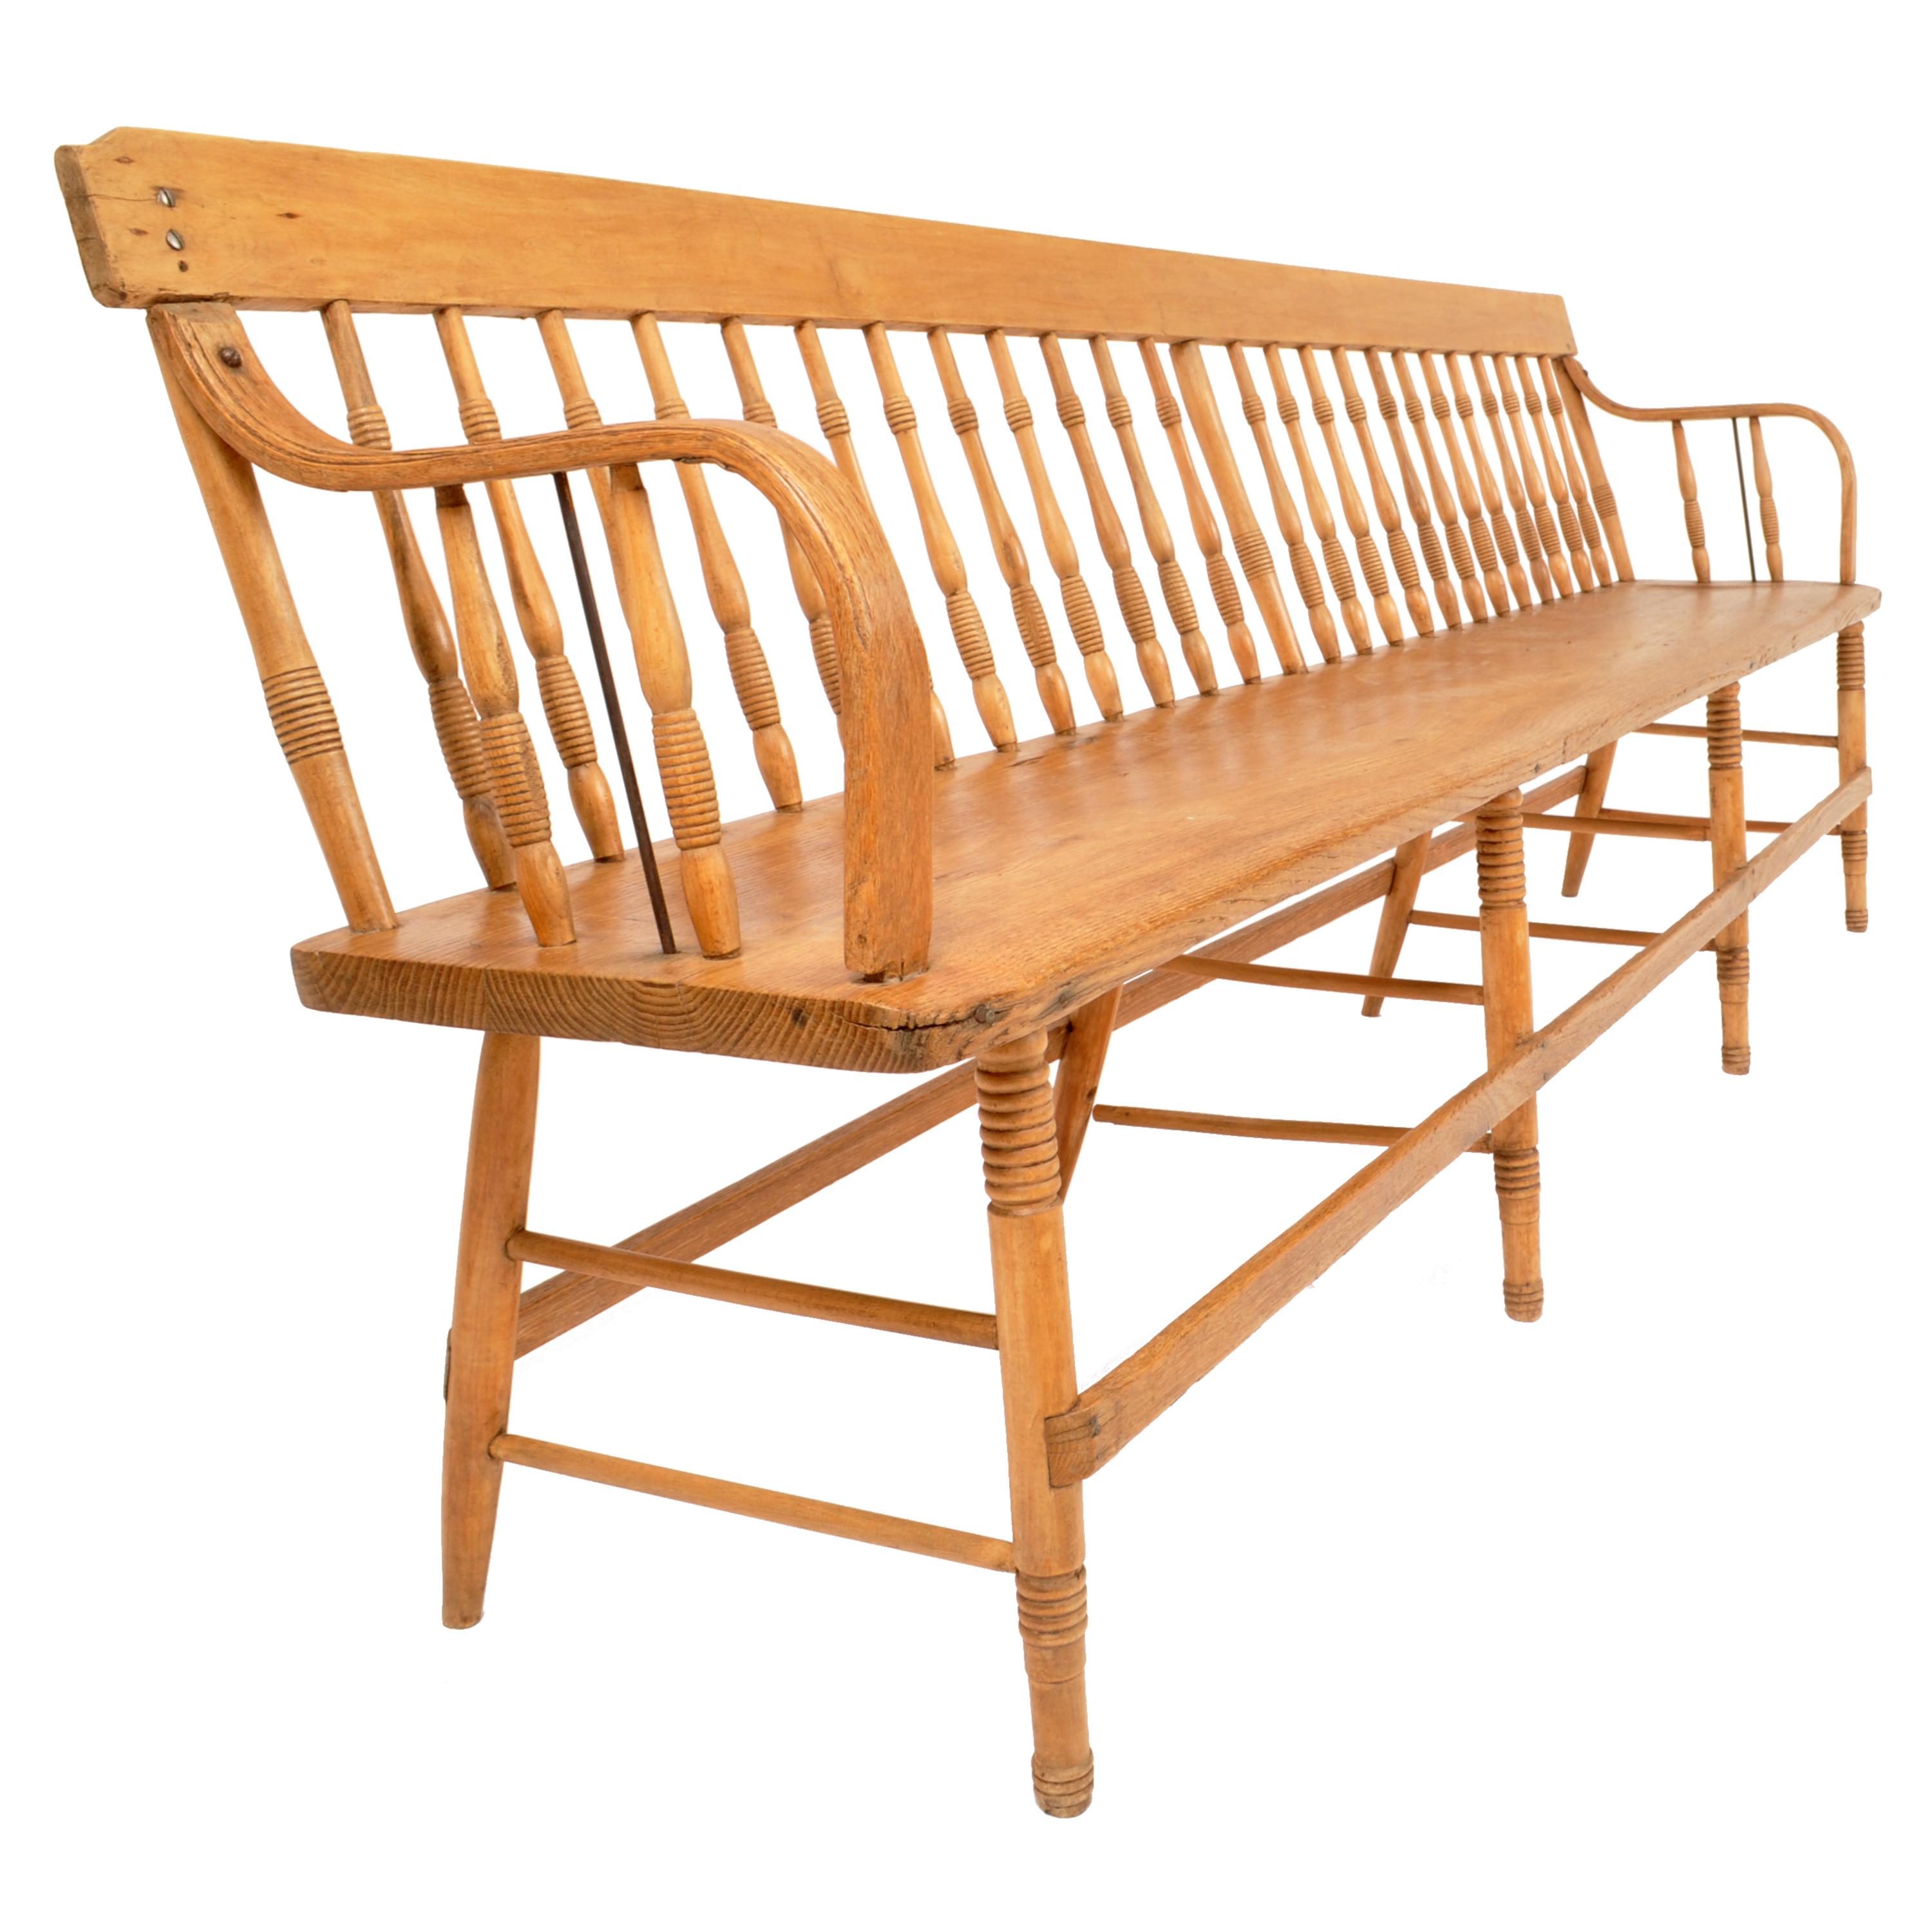 A very good, long (8ft) antique American pine and maple Colonial style spindled back deacon's bench, most likely New England, circa 1840. The bench having a single back splat with turned spindles below and having 'bentwood' arm supports at each end.